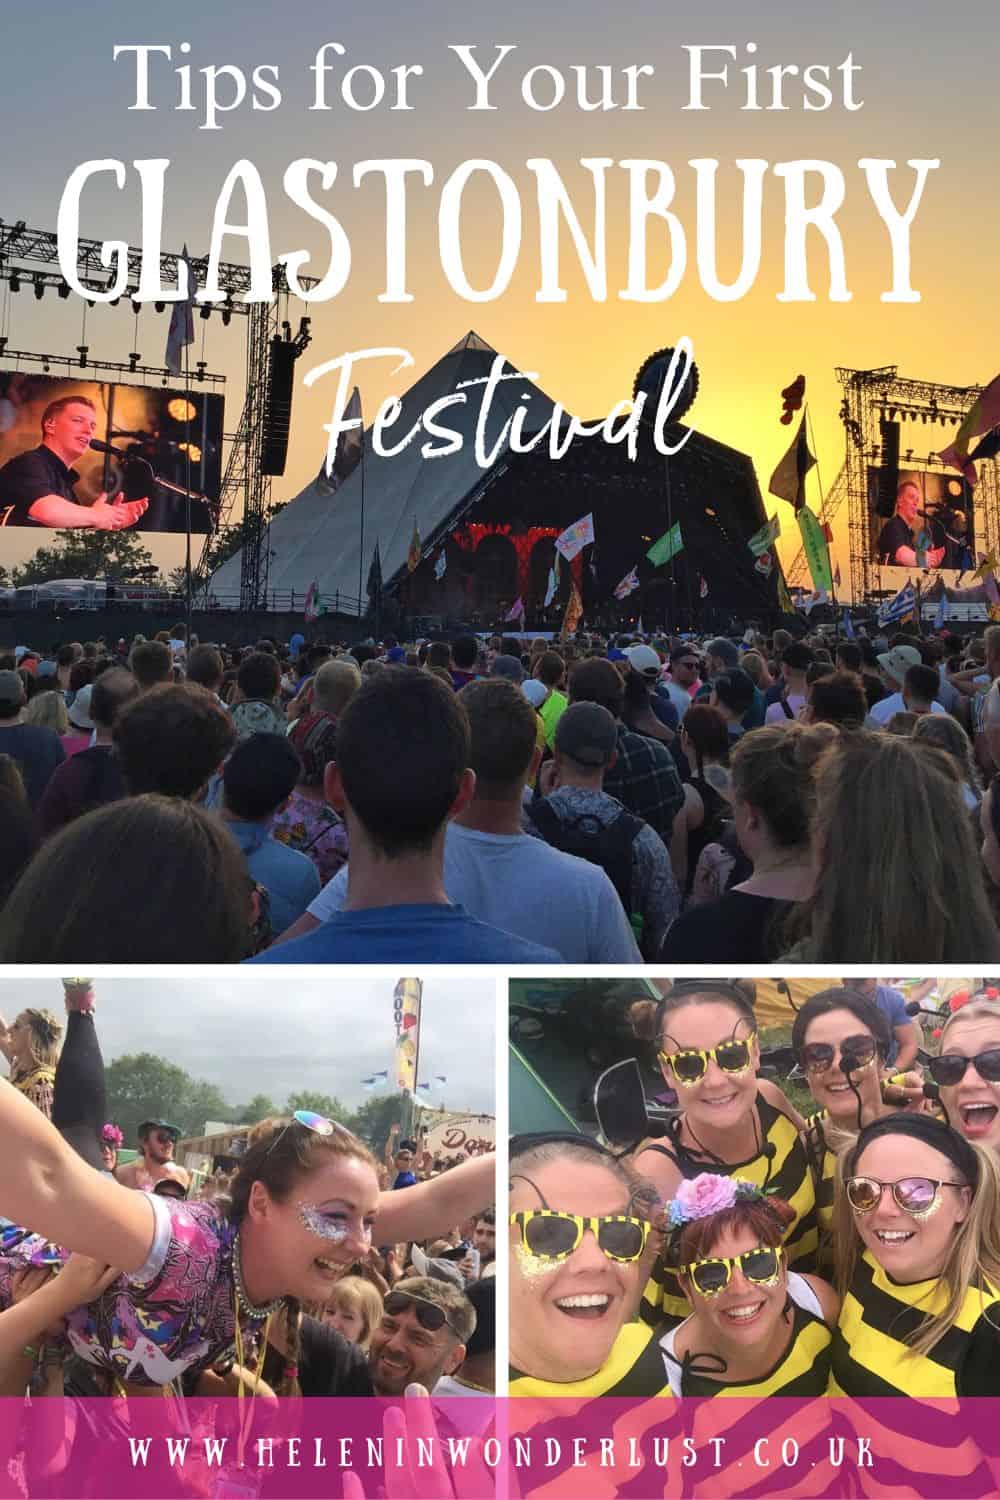 Tips for Your First Glastonbury Festival